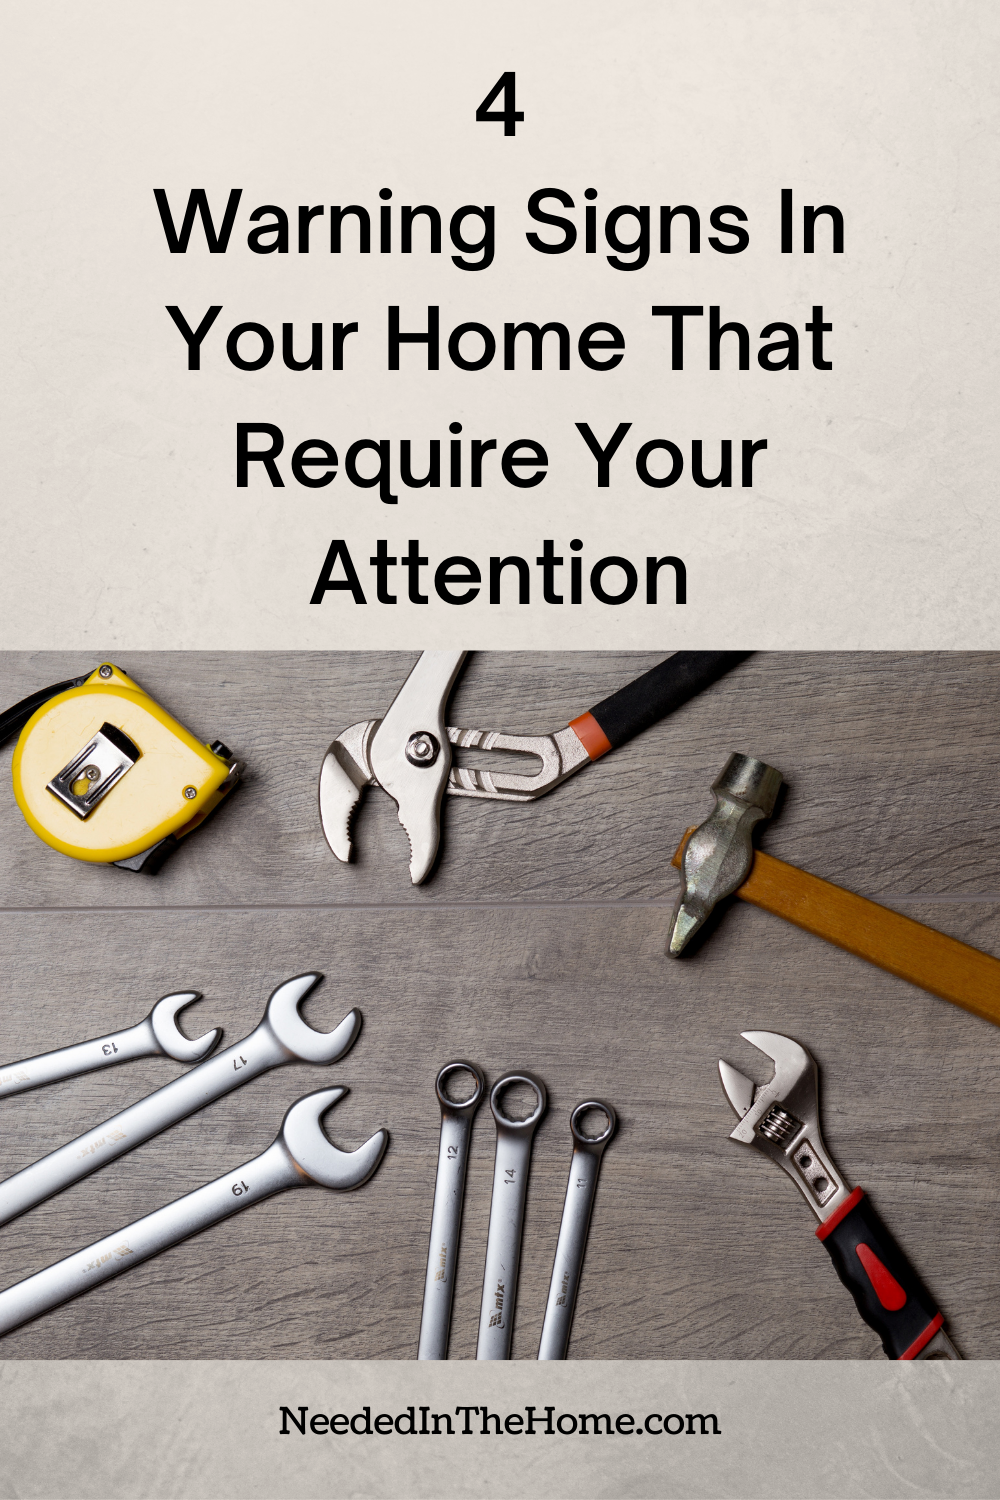 pinterest-pin-description 4 warning signs in your home that require your attention tools on floor neededinthehome